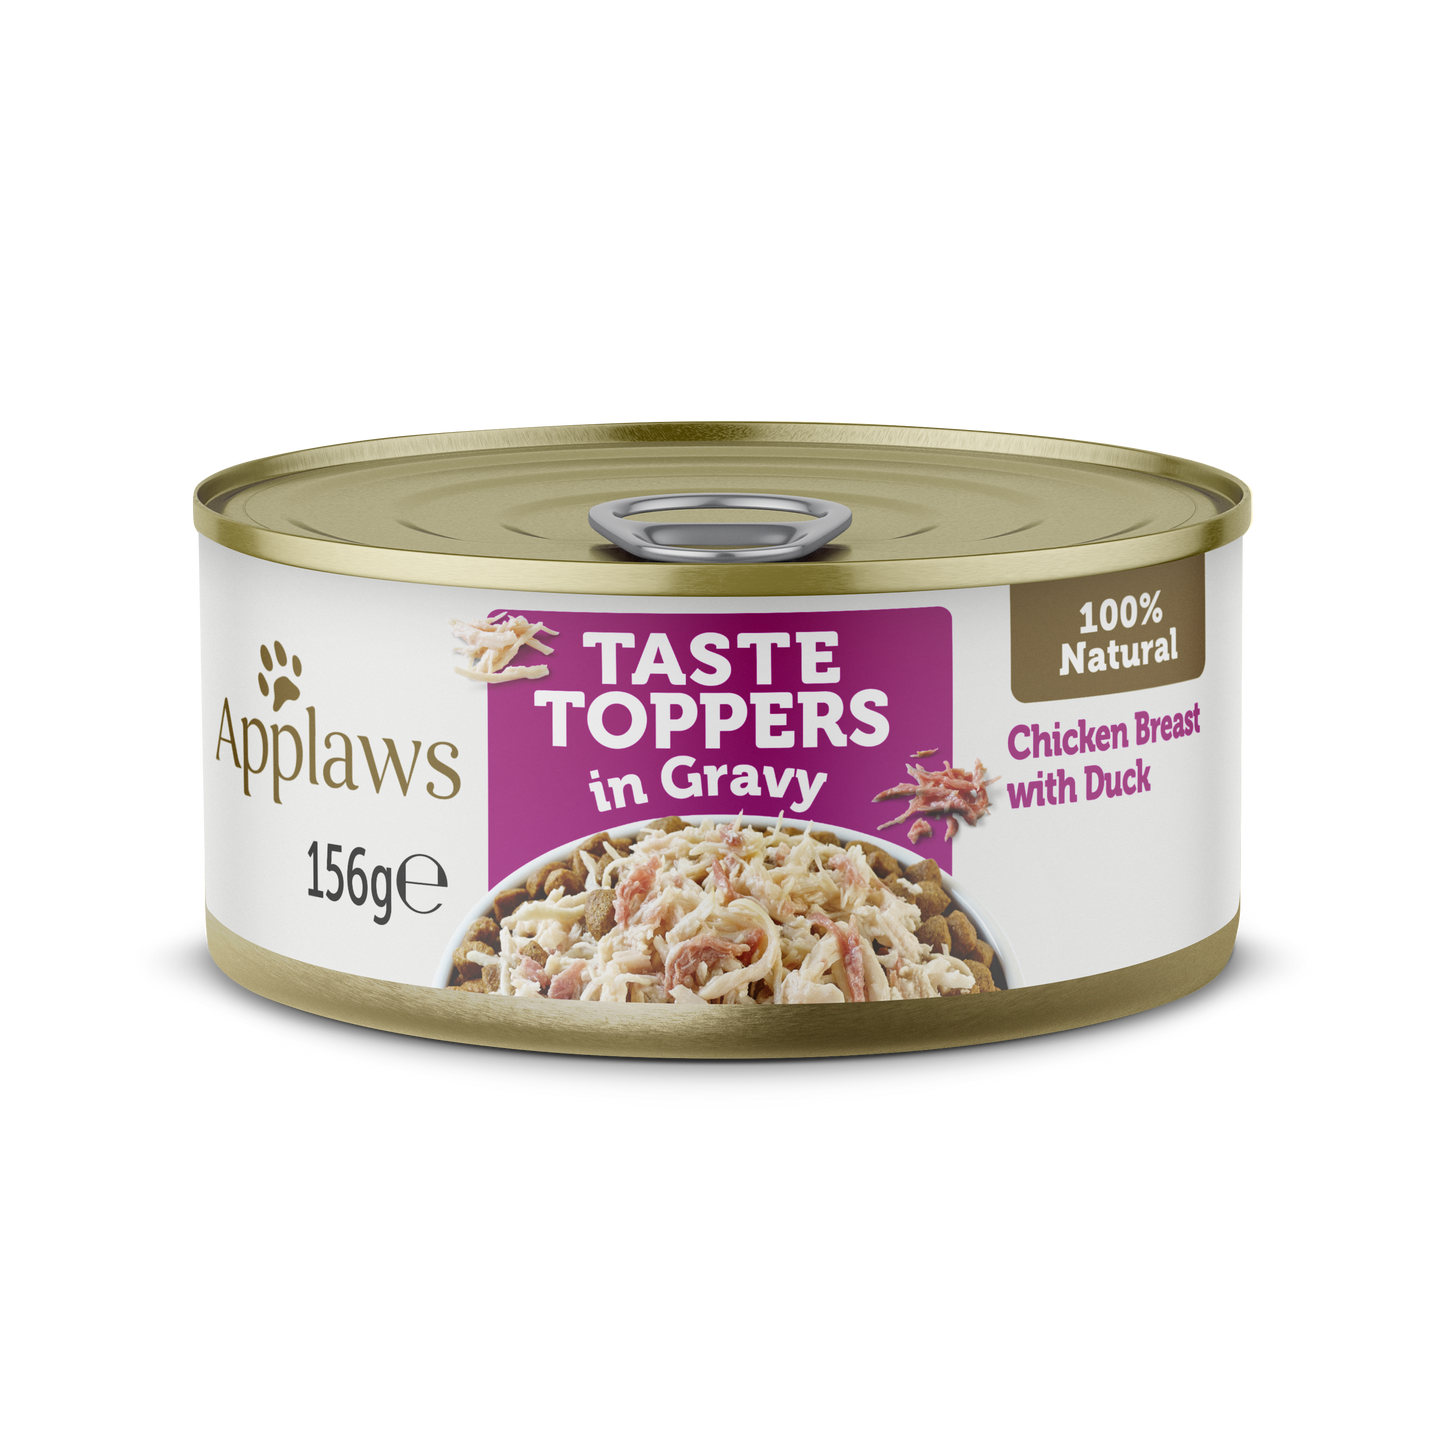 Applaws Taste Topper In Gravy Chicken with Duck for Dogs, 156G